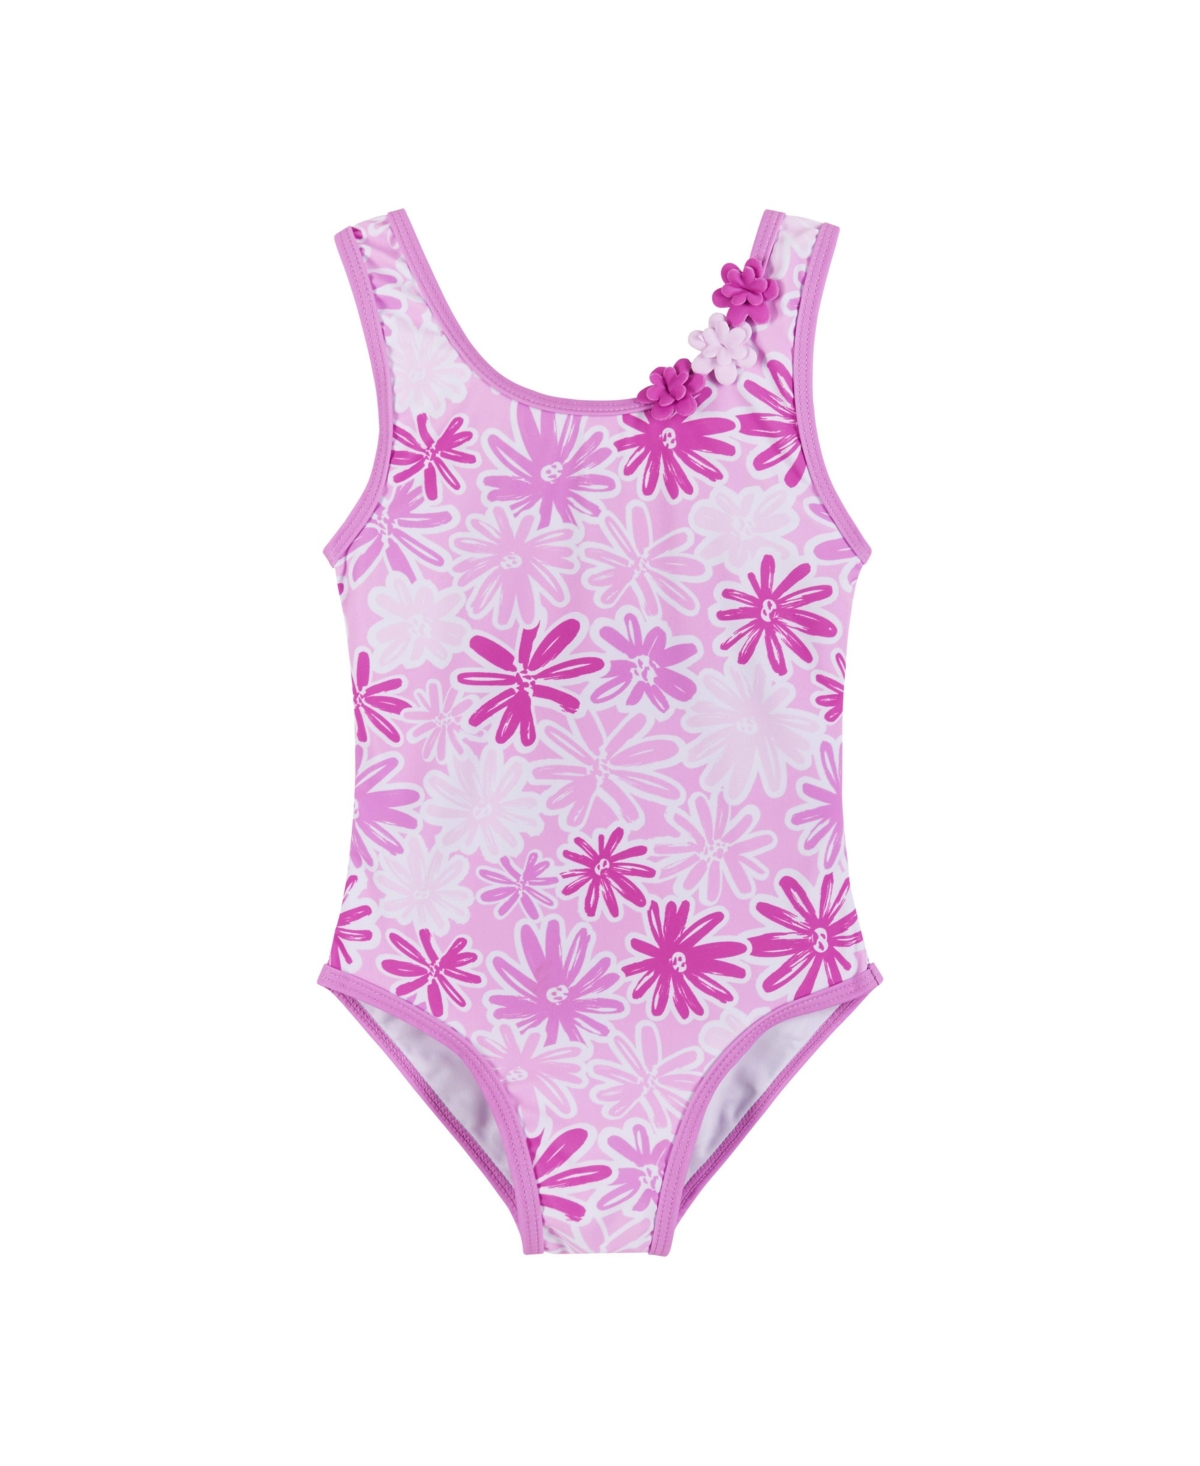 ANDY & EVAN TODDLER/CHILD GIRLS PINK FLORAL ONE-PIECE SWIMSUIT